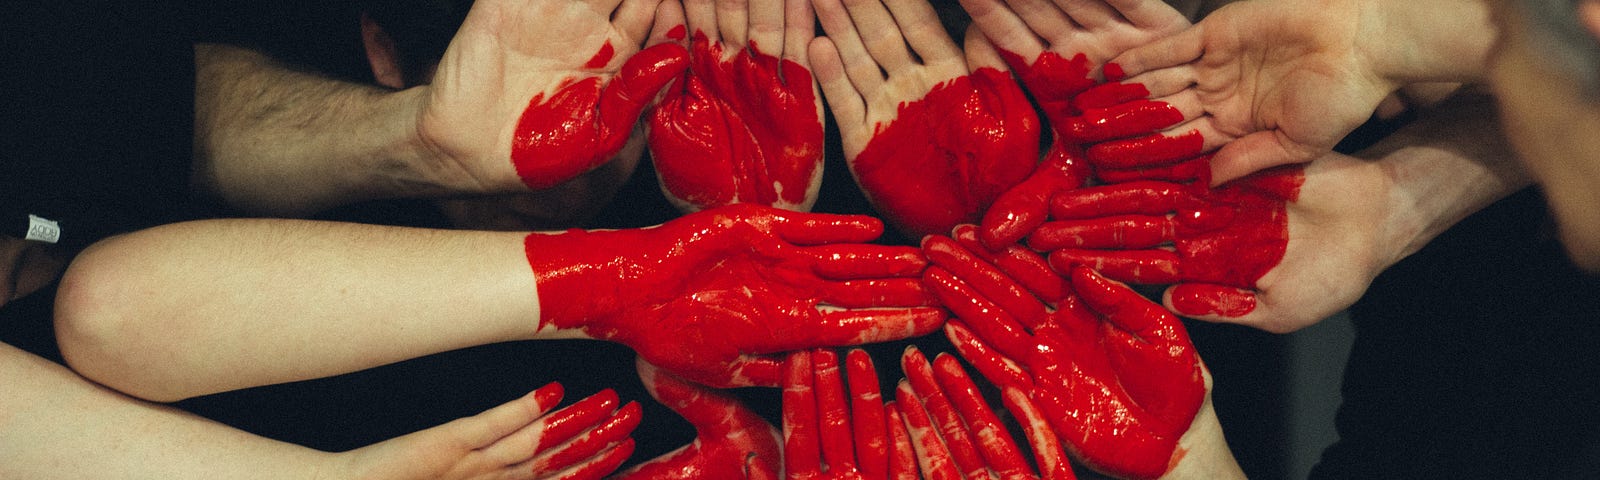 Numerous hands, with varying amounts of red paint, come together to form a heart. A heart attack (or myocardial infarction) is a critical emergency. The incident involves a sudden blockage in one or more heart arteries that supply the heart muscle with oxygen-rich blood.